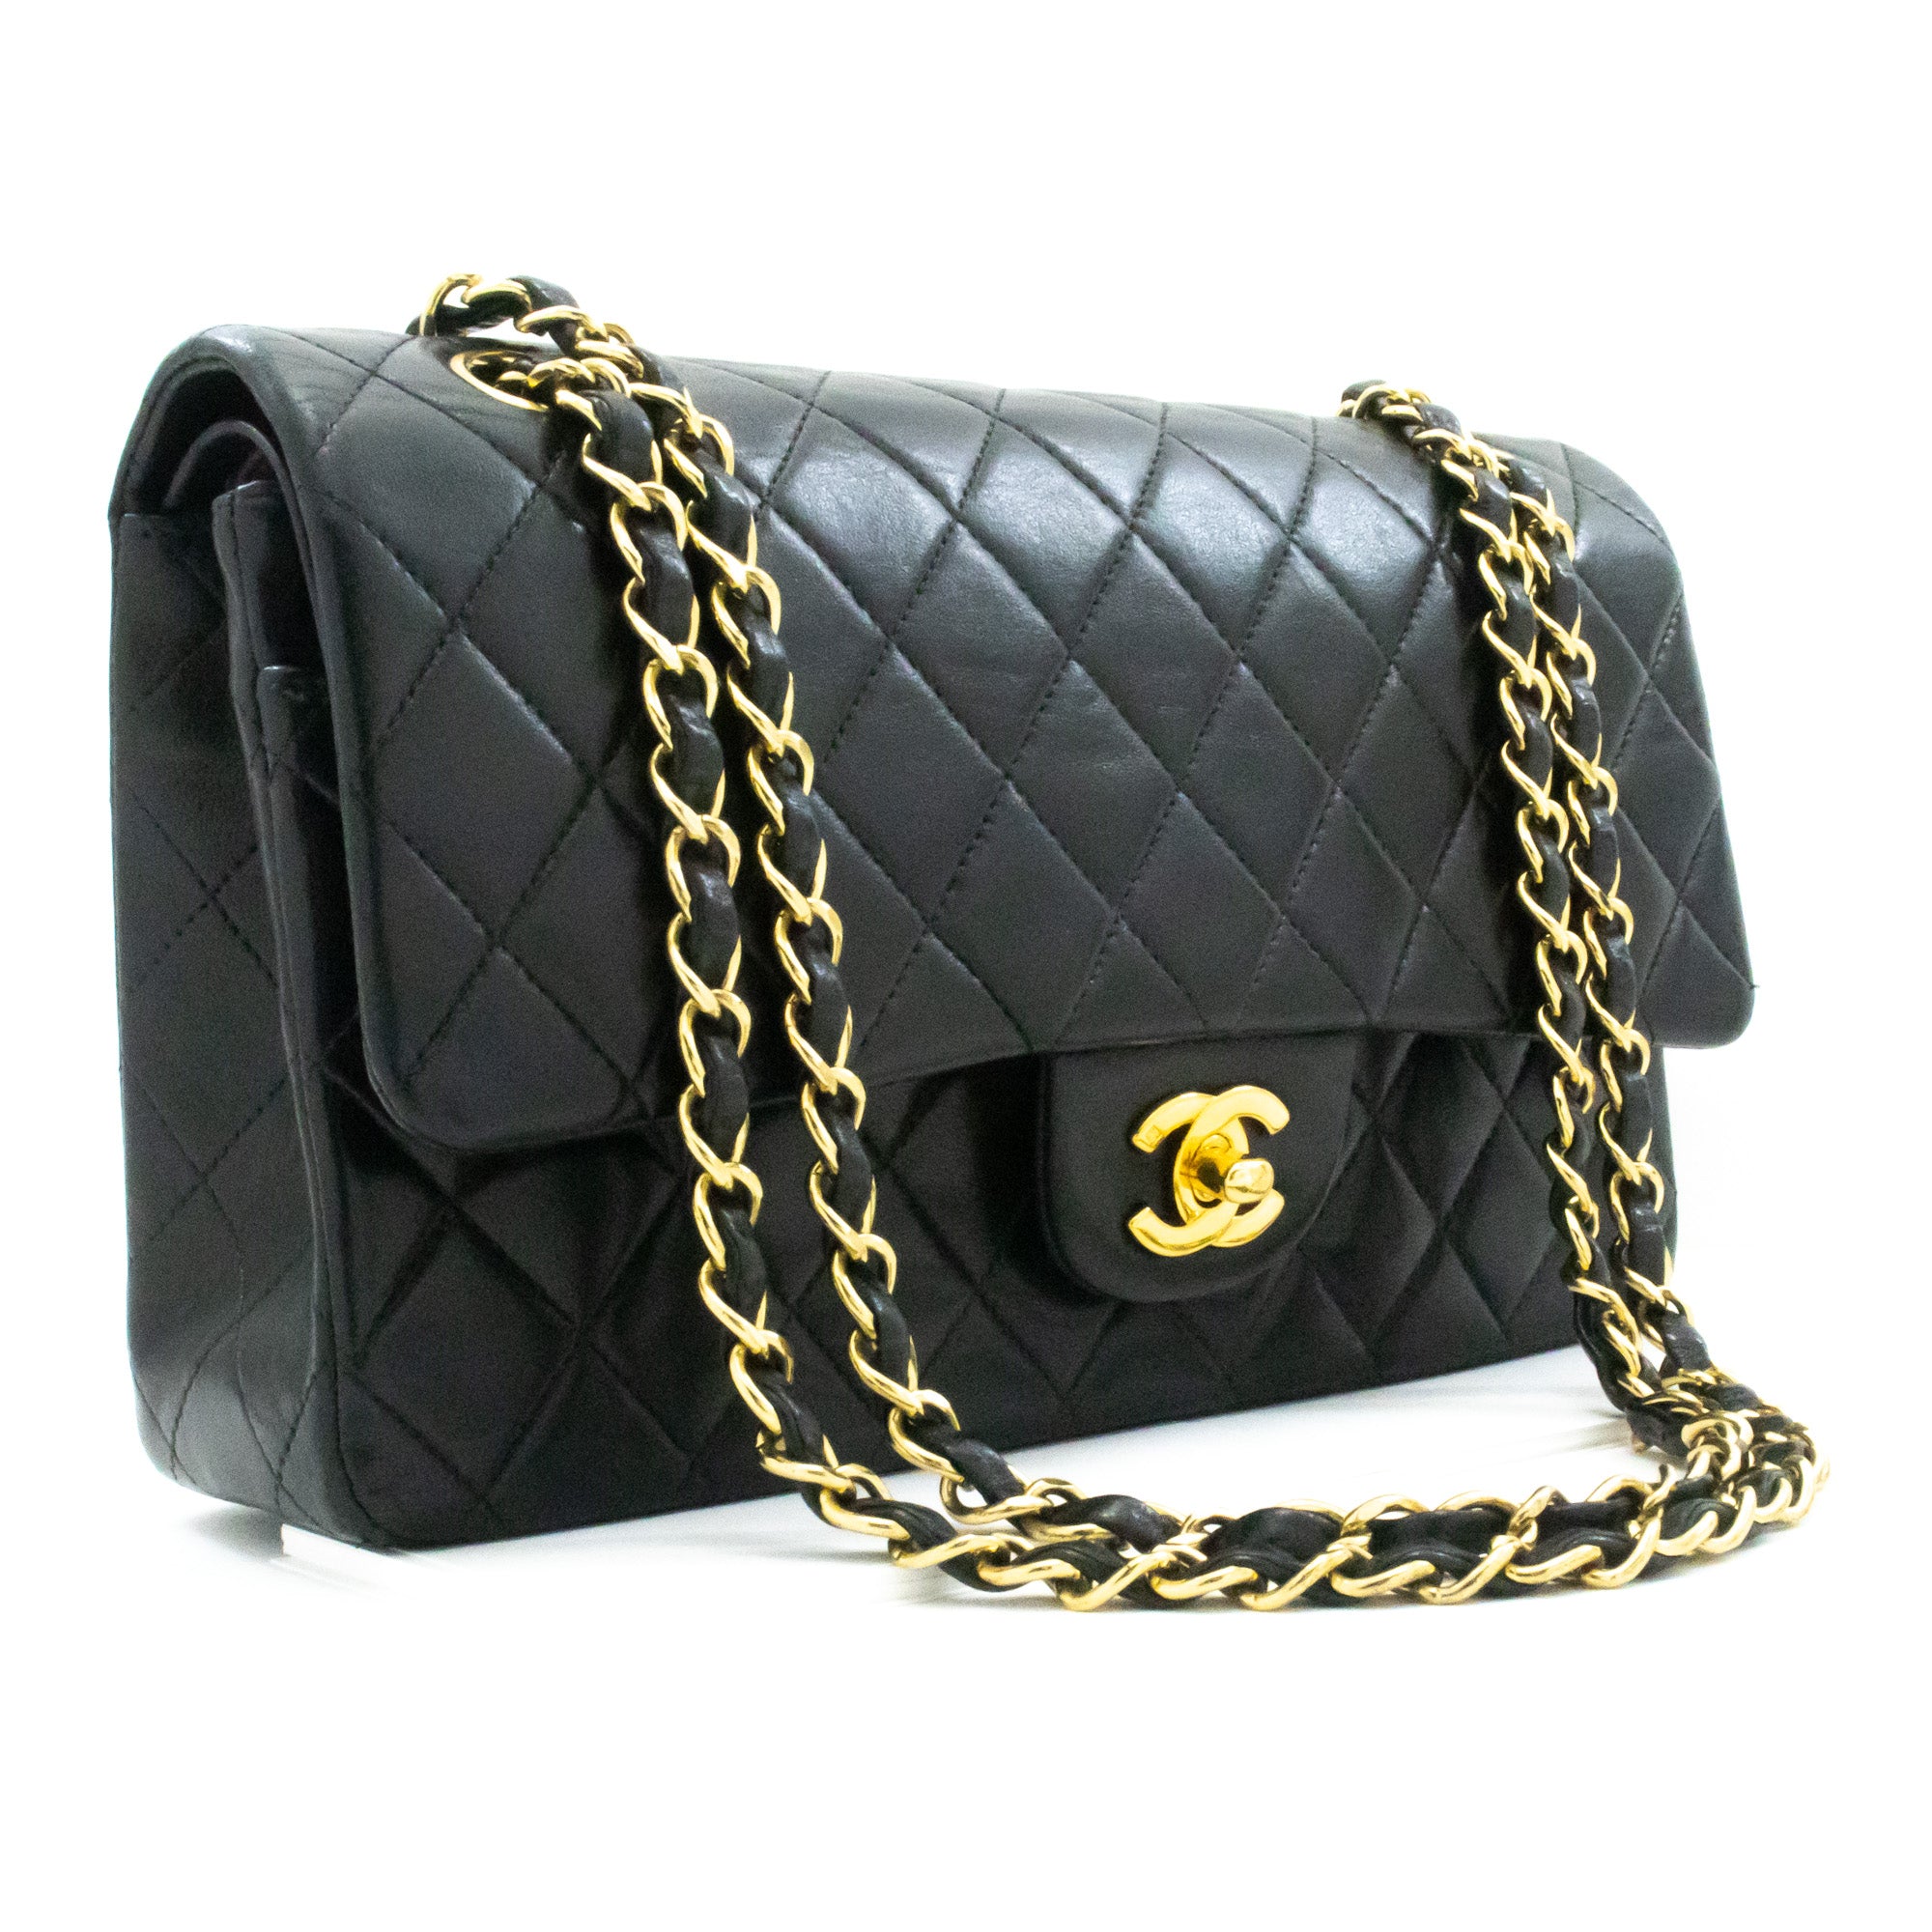 Best department store online Pre-owned Luxury Handbags - Shop Used Designer  Bags, small black chanel crossbody bag authentic